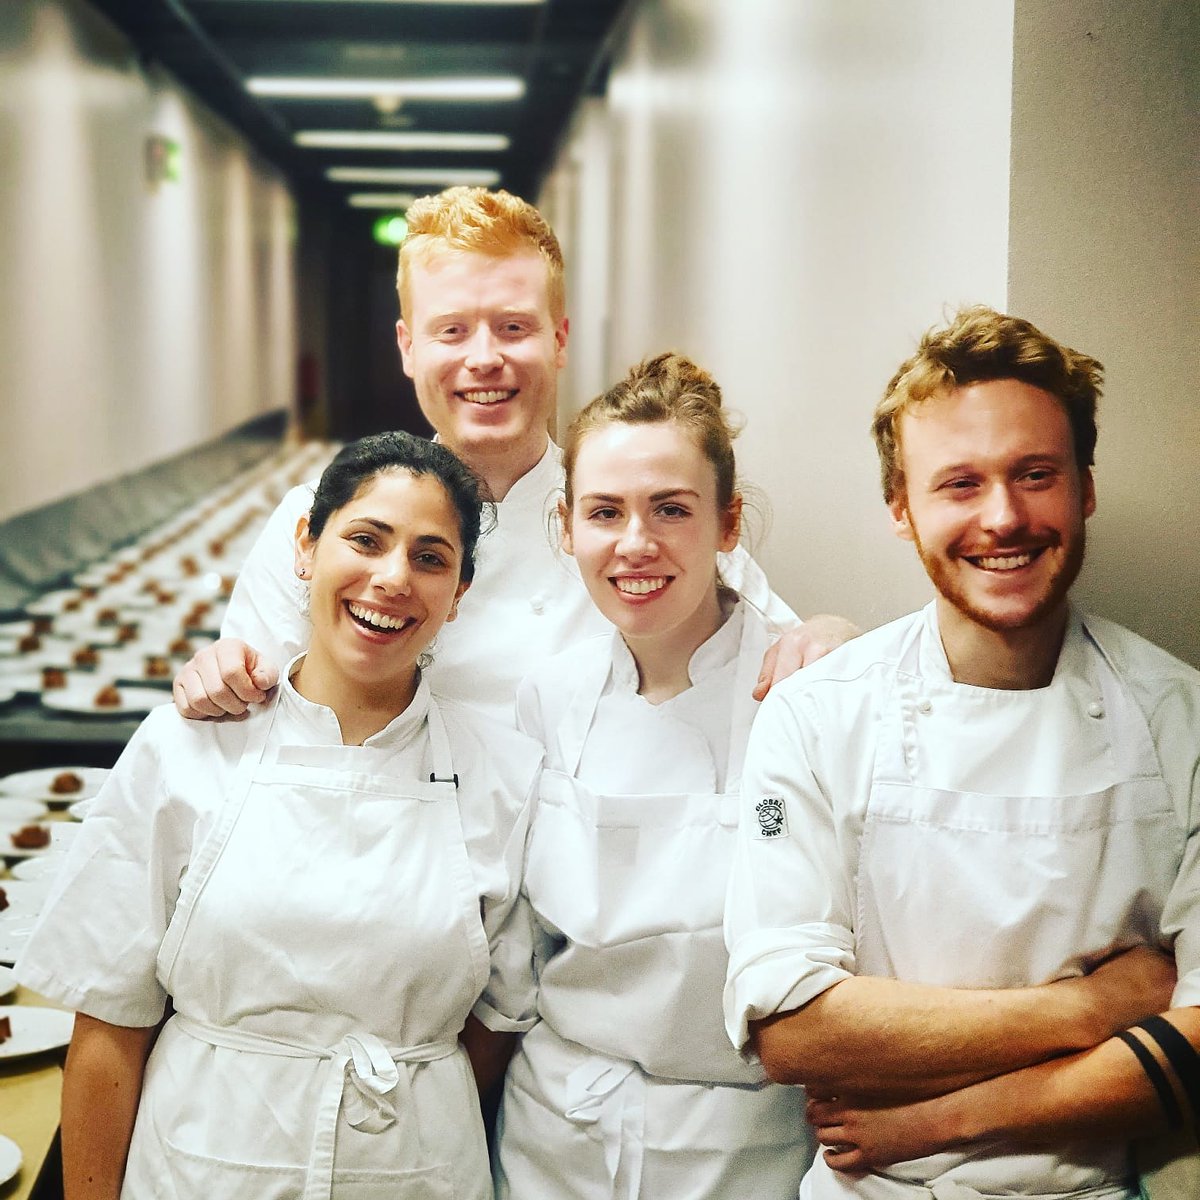 Missing this incredible pastry team 💗

@MarkMoriarty1
@taragartlan
@_the_GREENHOUSE
#missingthis #teamwork #pastryteam #pastrychef #cheflife